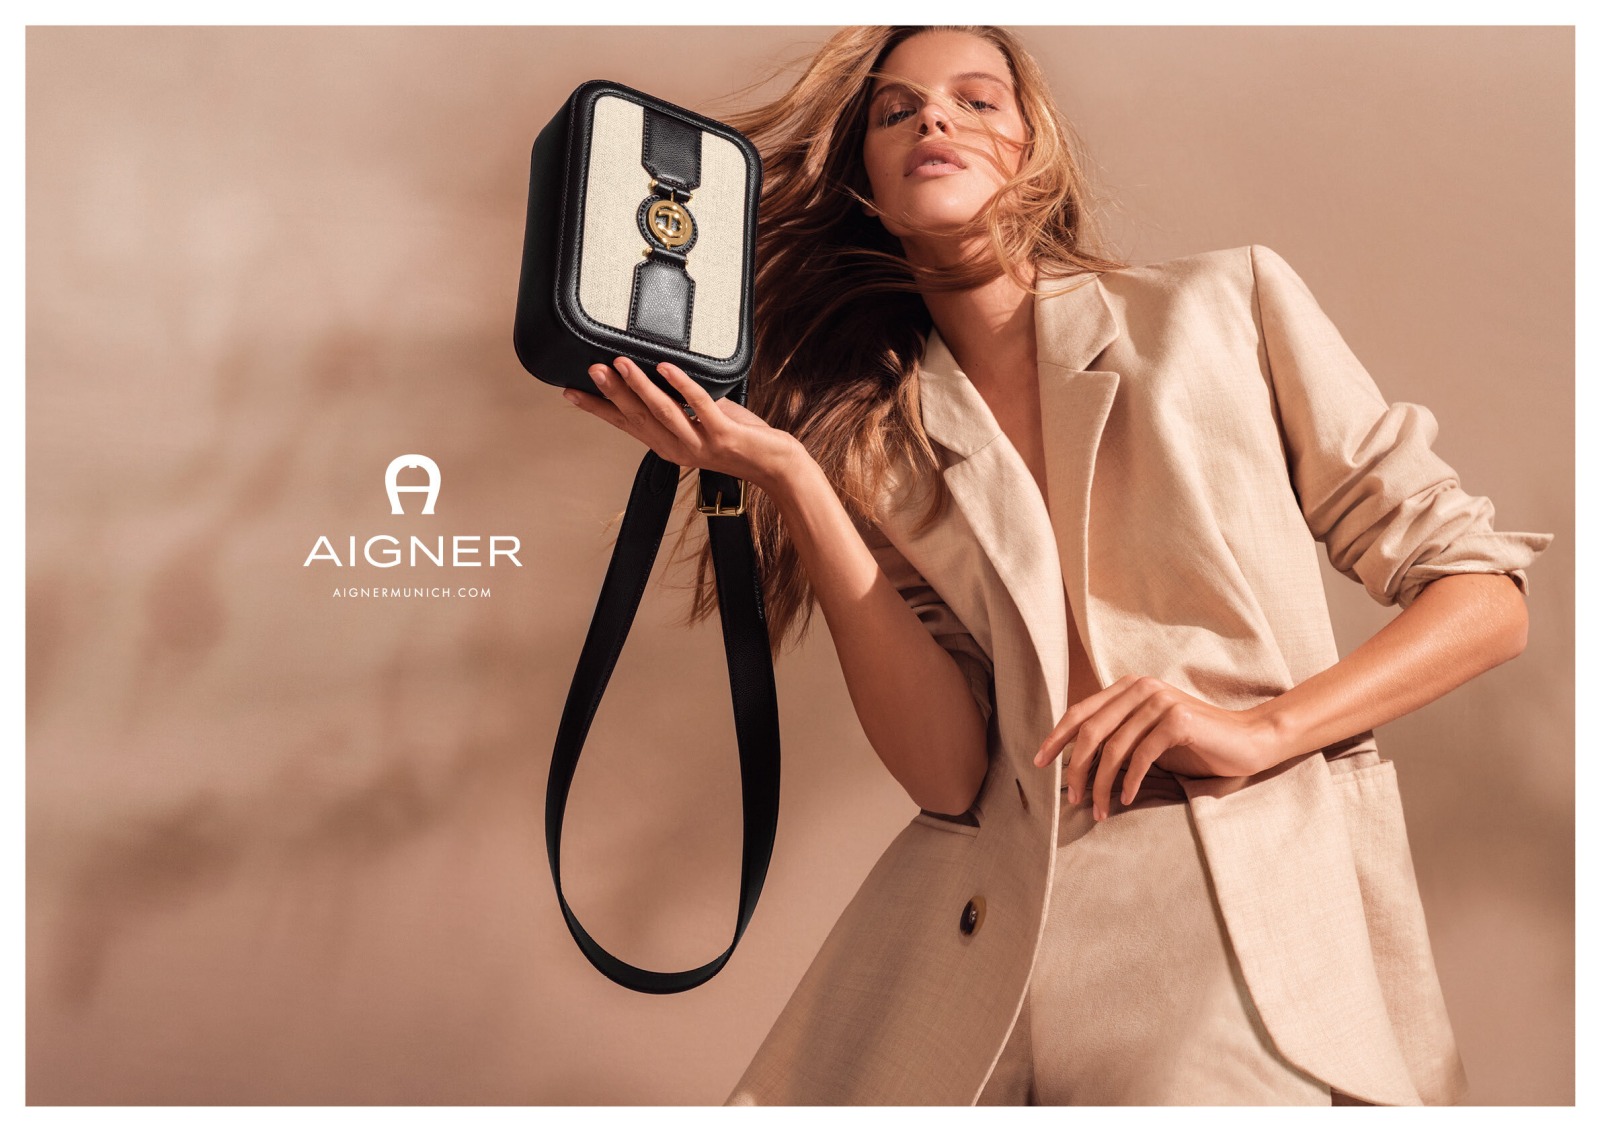 AIGNER 3 by Andreas ORTNER